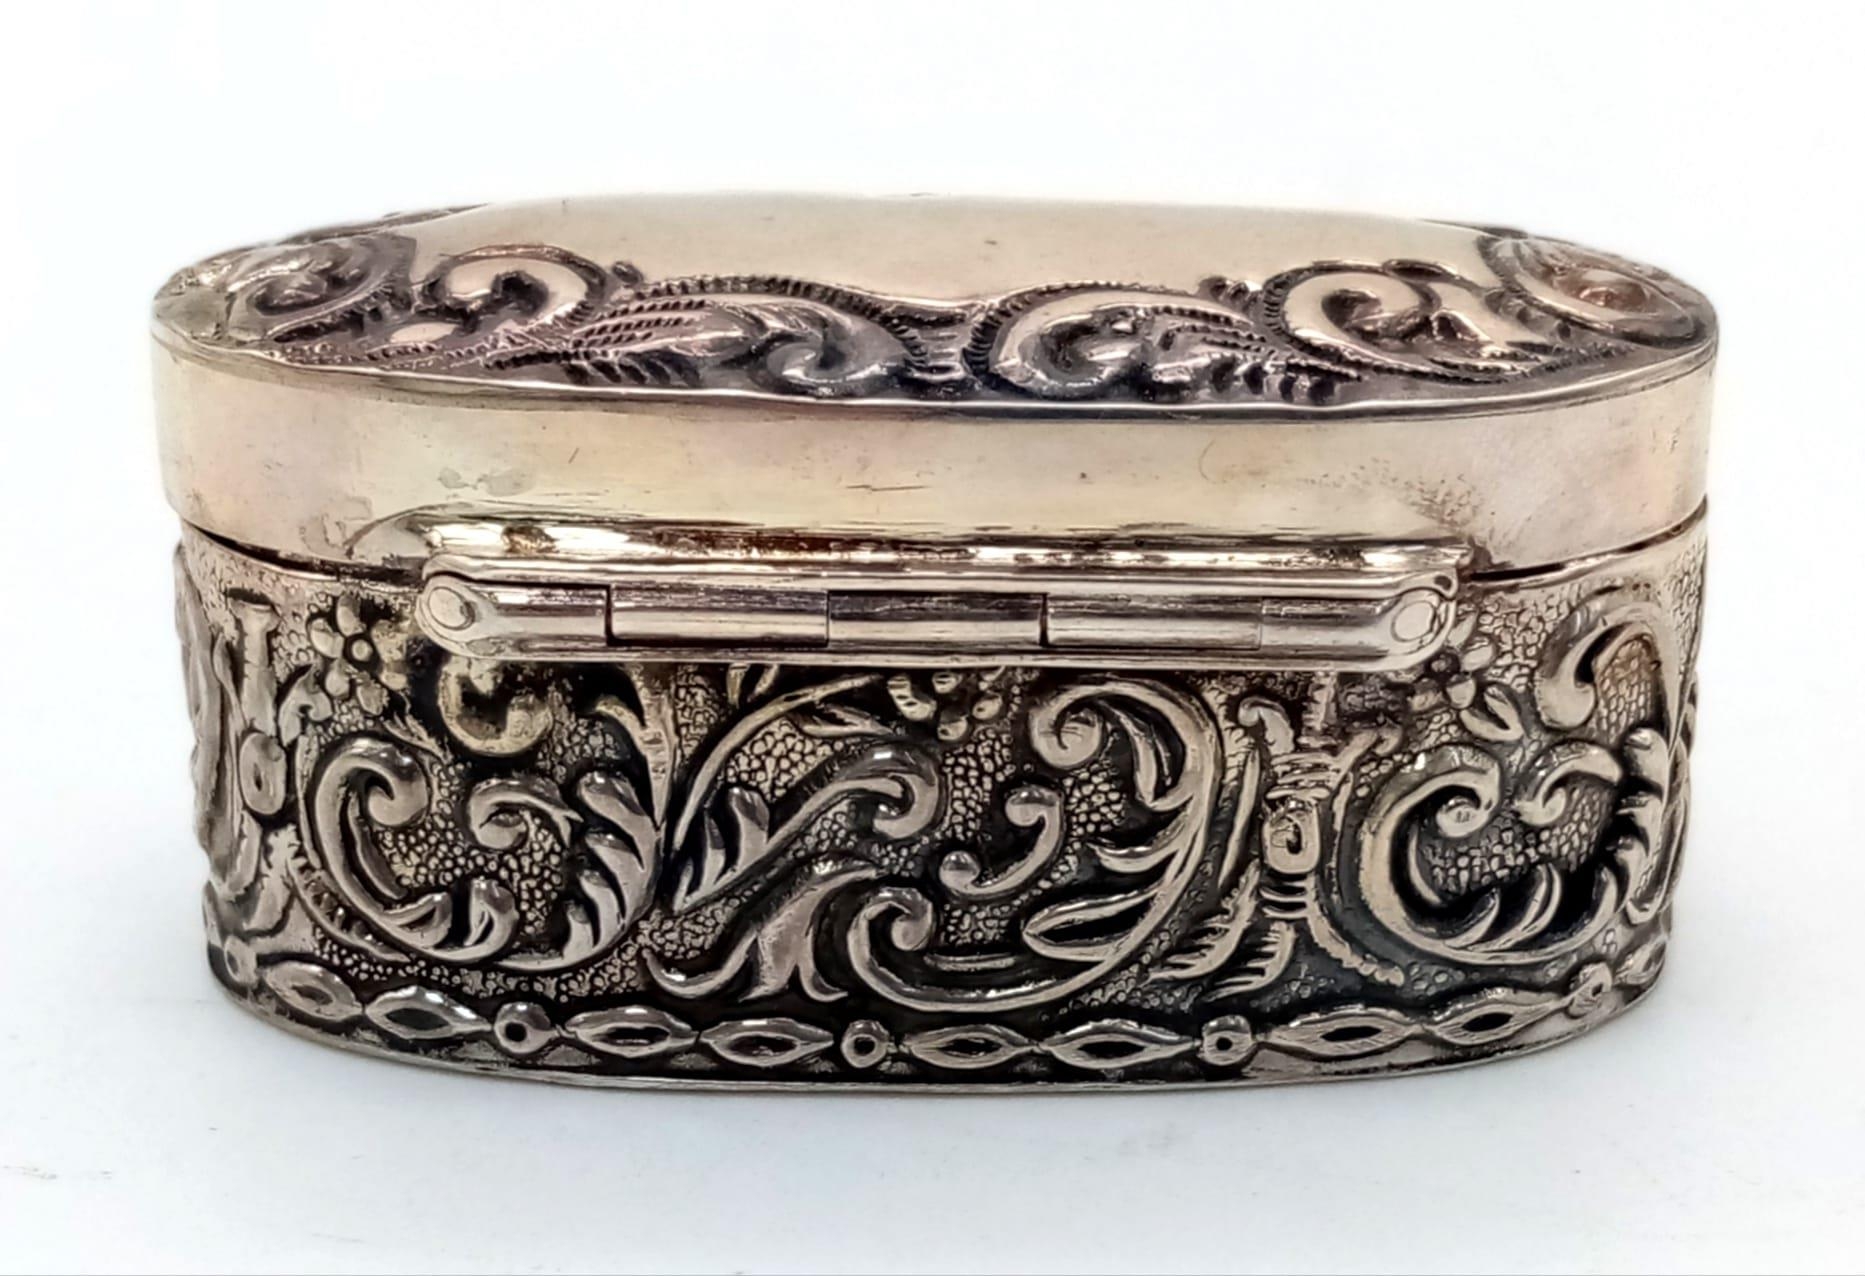 An Antique Silver Oval Trinket Box with Scrolled Decoration. 28g. 5 x 2.5cm. - Image 3 of 3